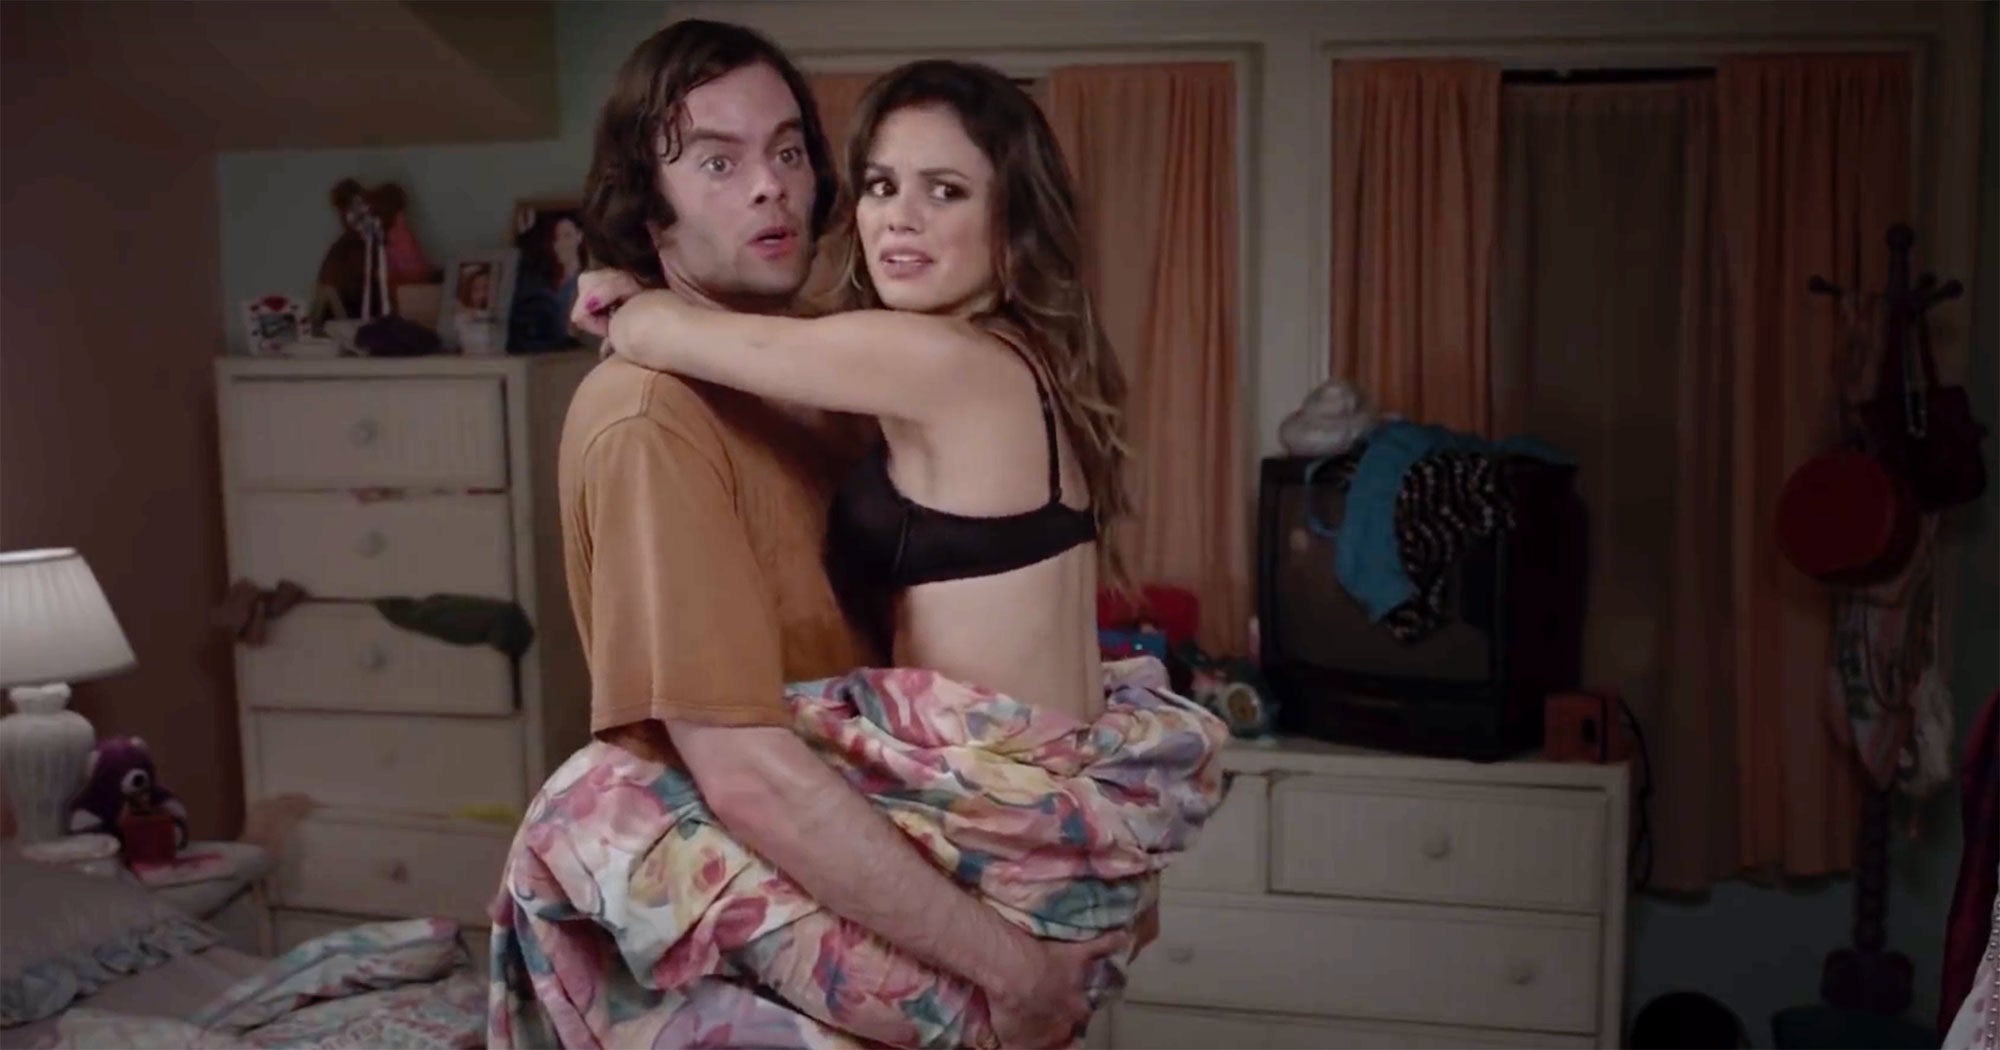 Bill Hader and Rachel Bilson spark dating rumors as they're spotted ou...